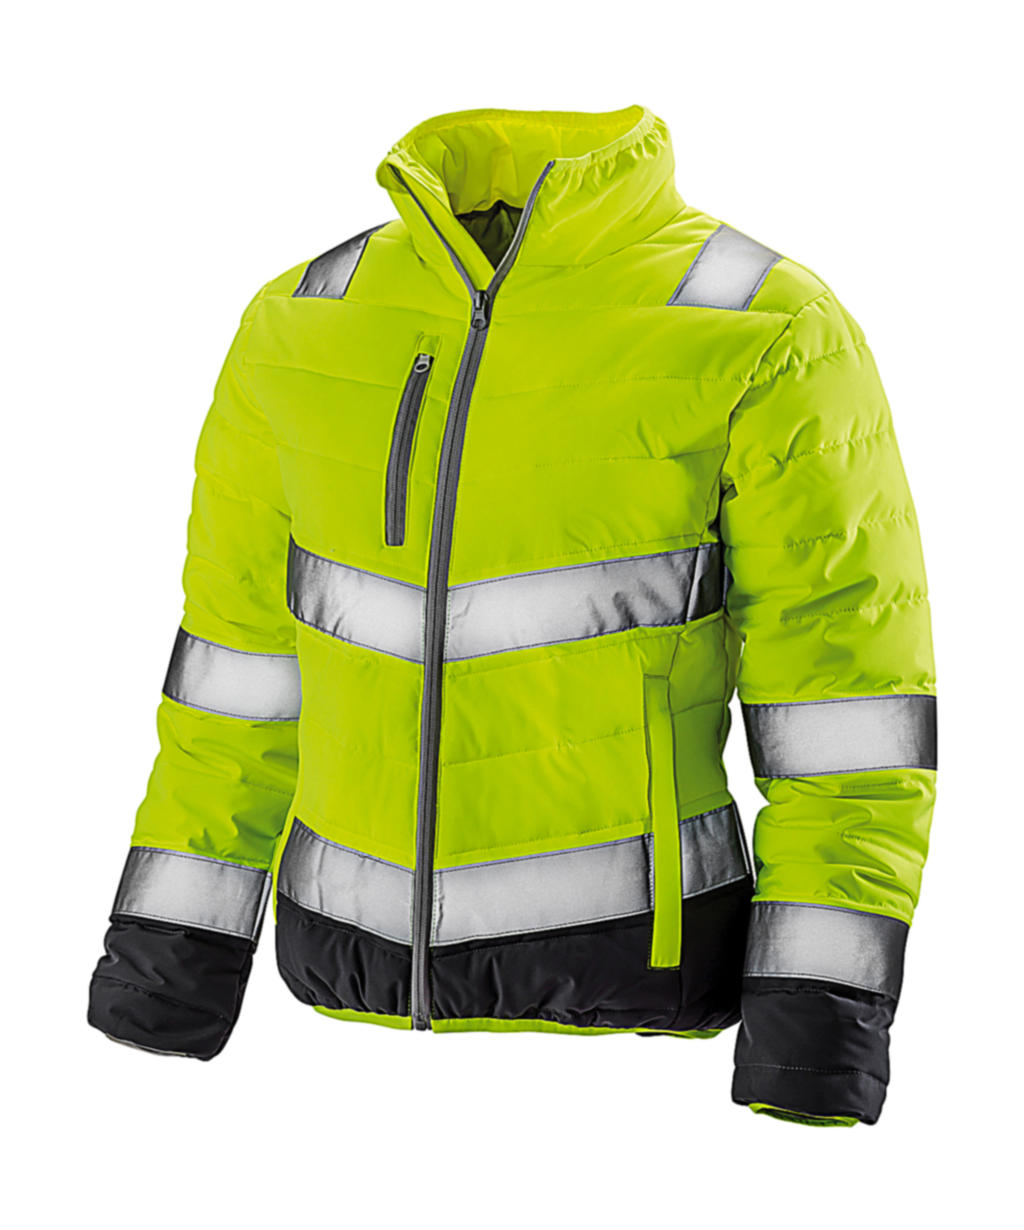  Womens Soft Padded Safety Jacket in Farbe Fluo Yellow/Grey